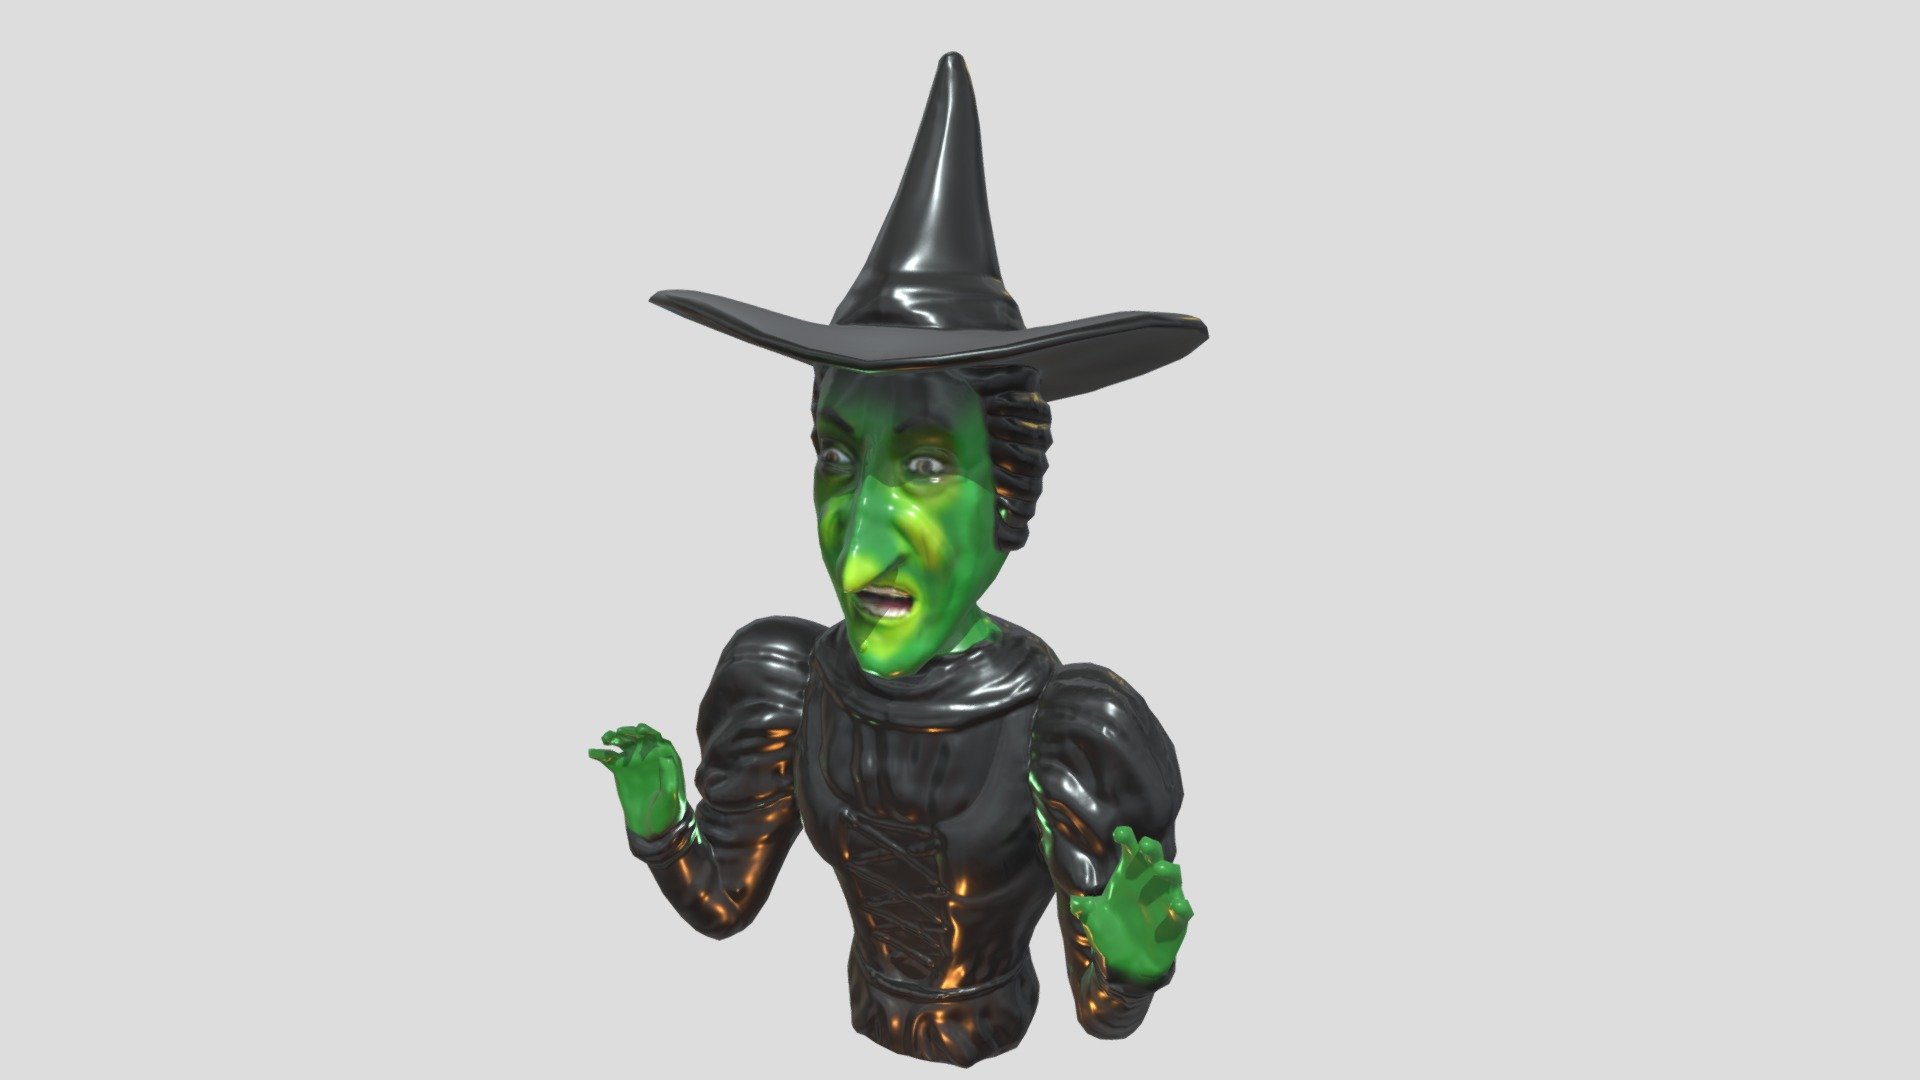 Wicked Witch Toy from The Wizard of Oz pinball